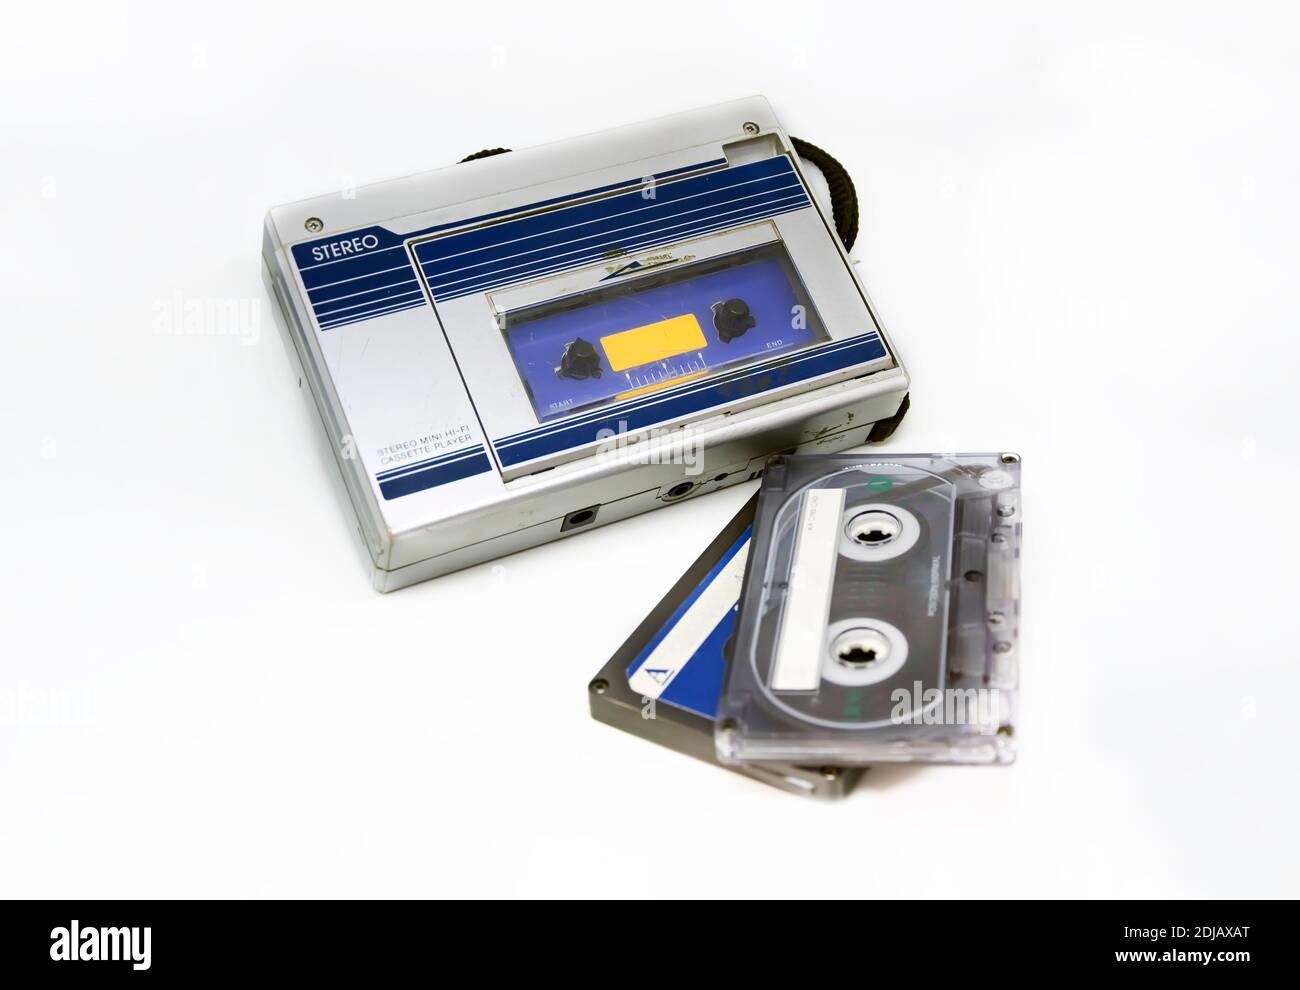 https://c8.alamy.com/comp/2DJAXAT/old-portable-stereo-audio-tape-cassette-player-isolated-on-a-white-background-obsolete-technology-80s-listening-to-music-2DJAXAT.jpg